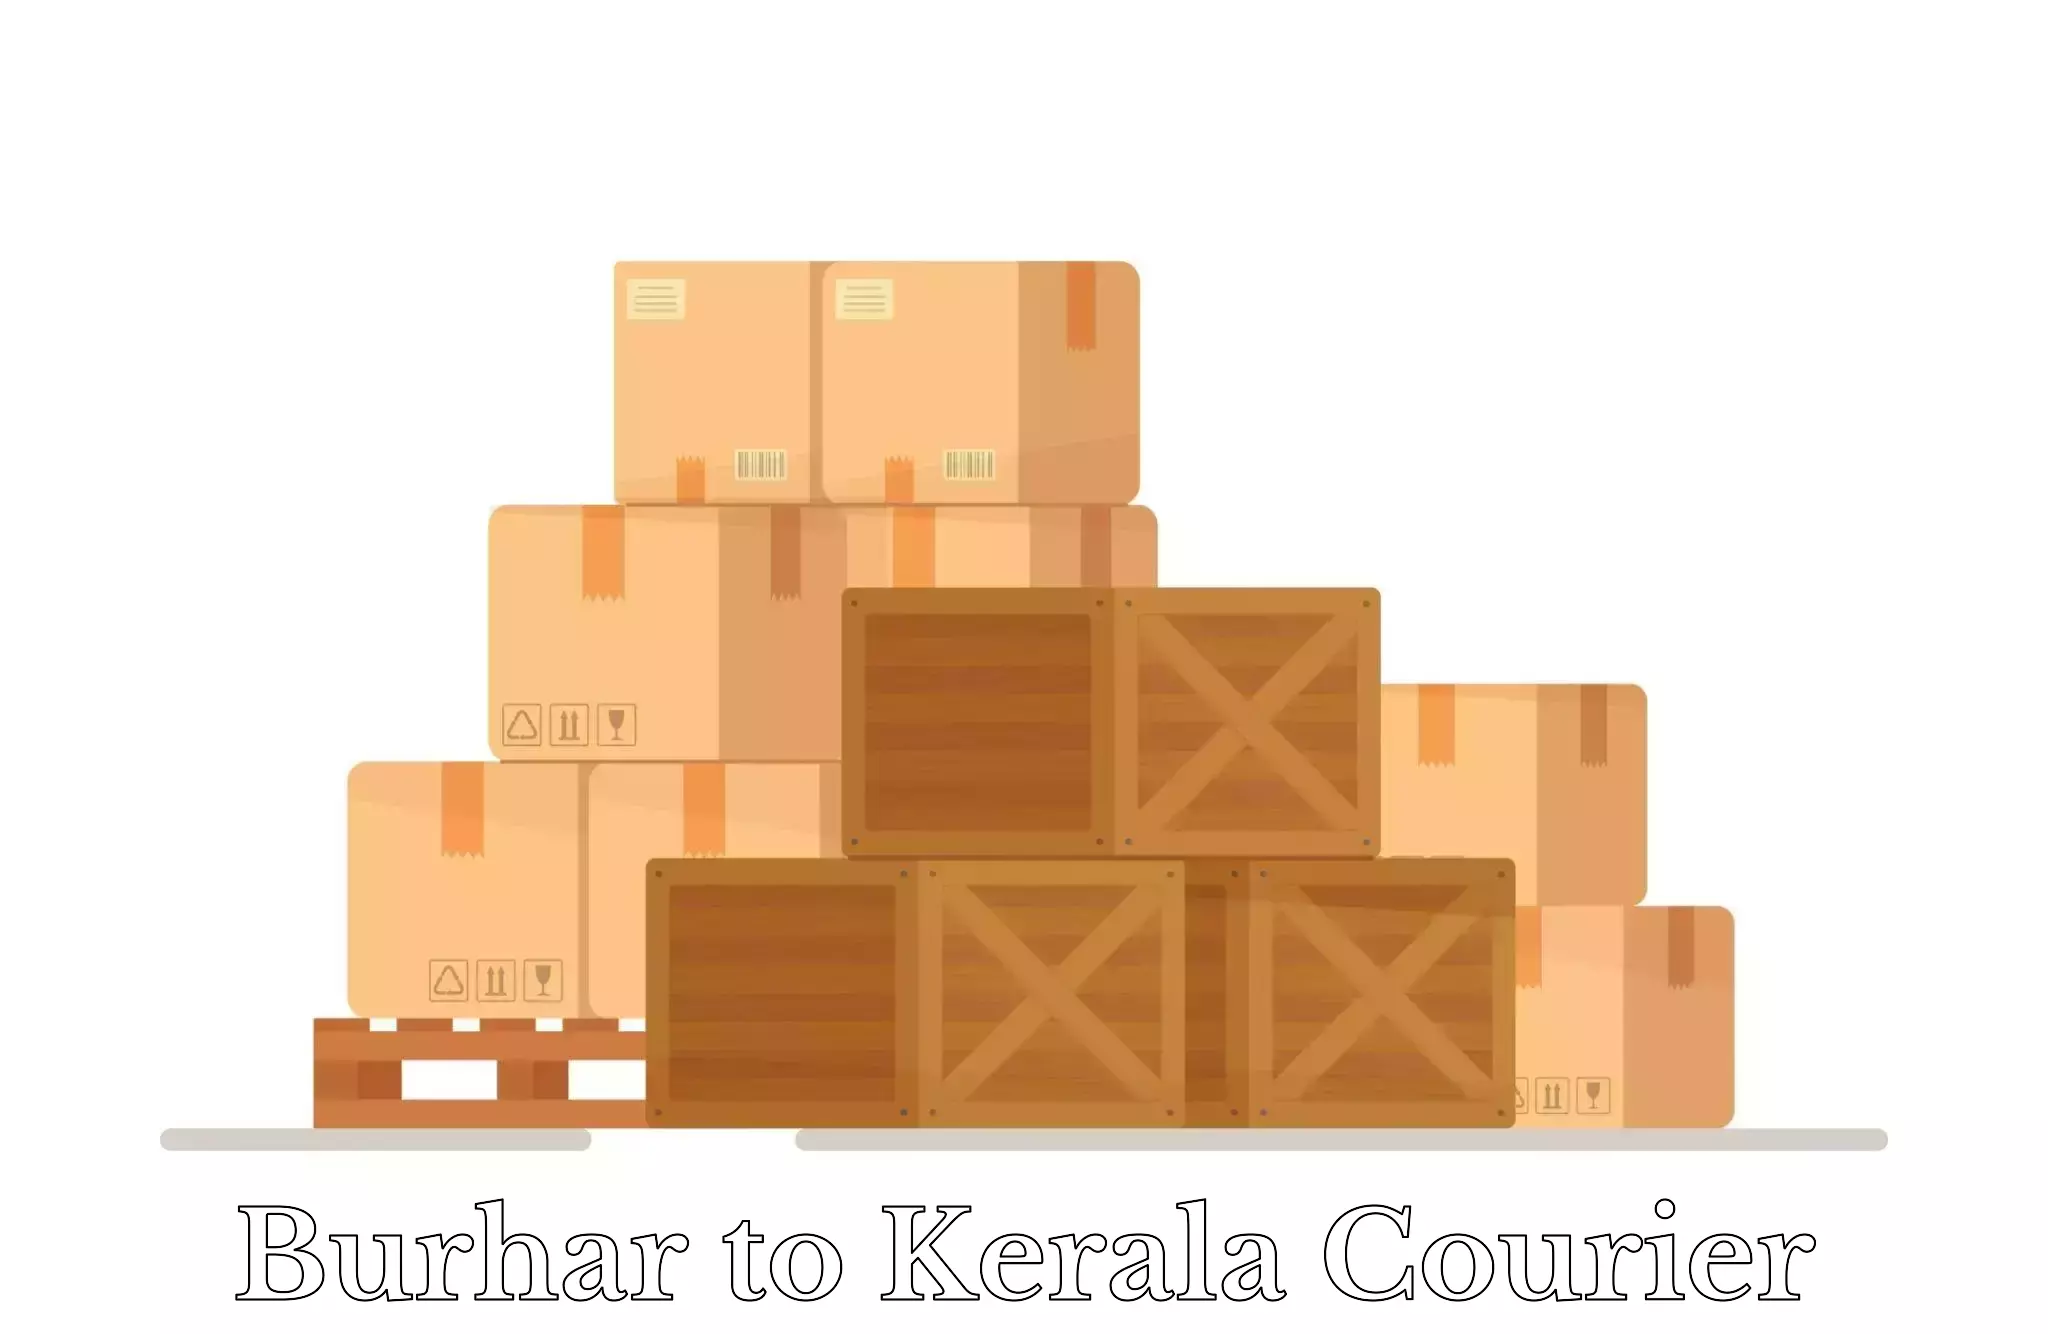 Online luggage shipping booking Burhar to Kozhikode